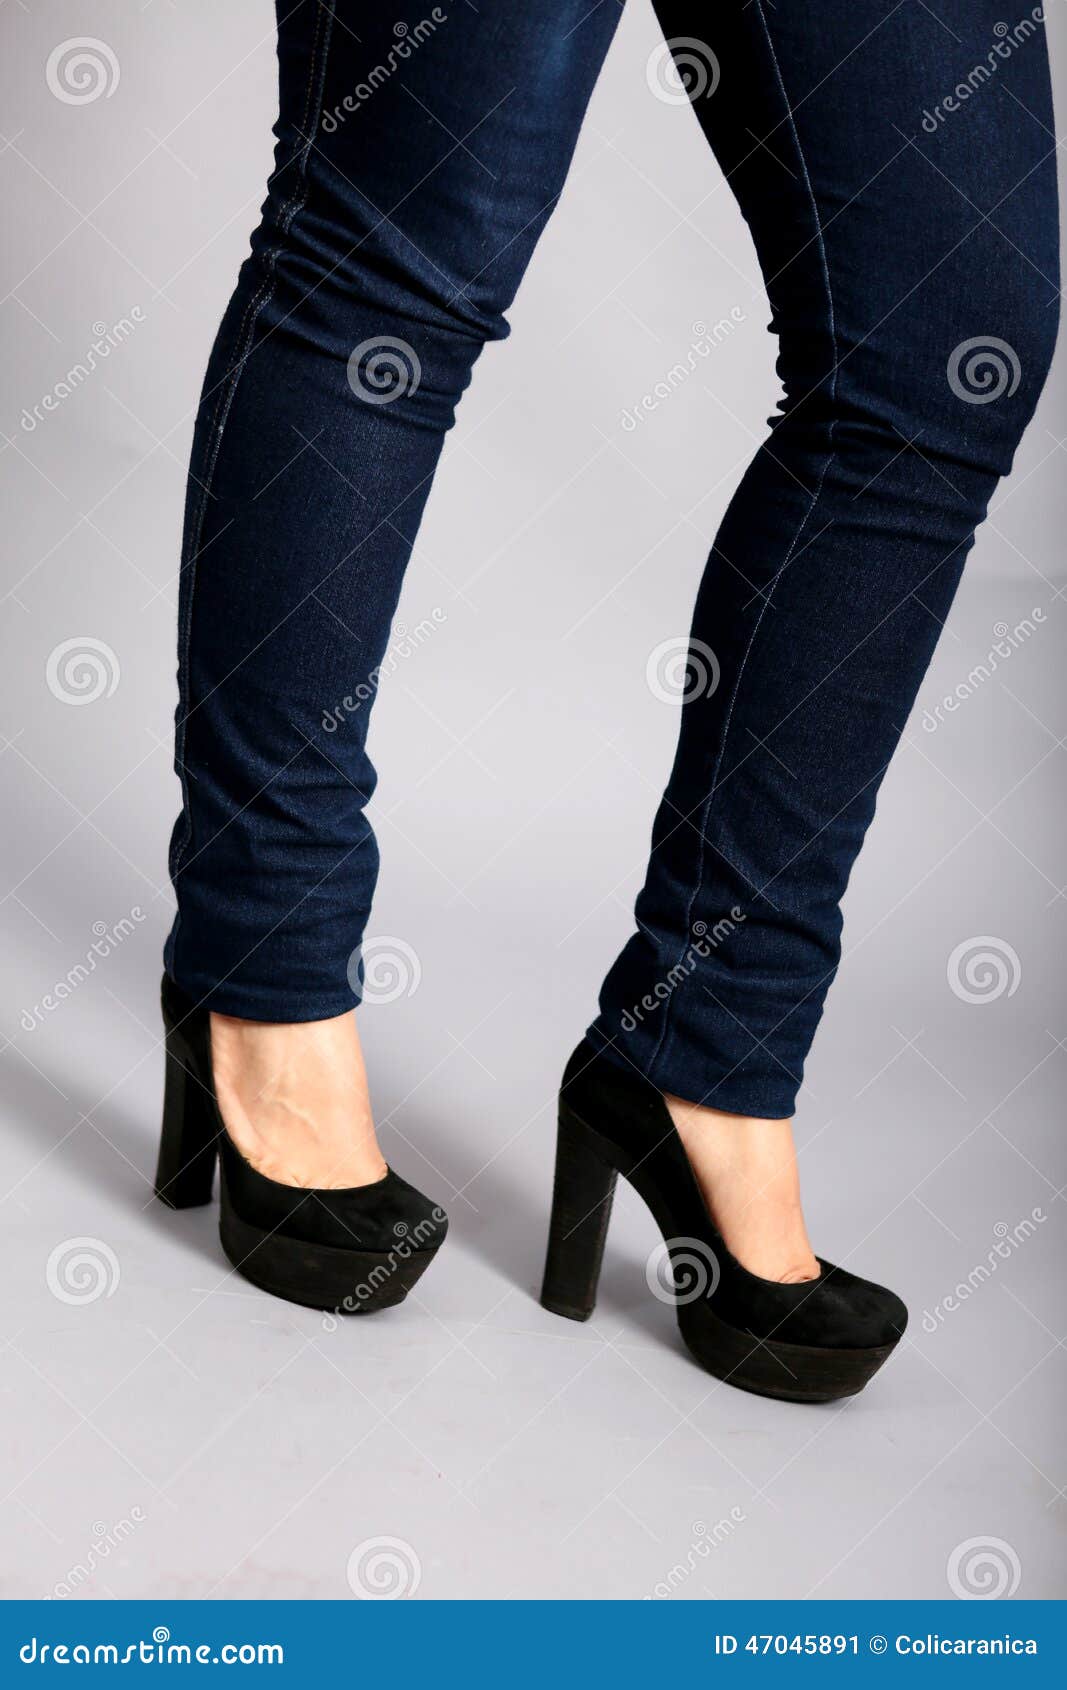 Jeans and heels stock image. Image of heels, outfit, fashion - 47045891